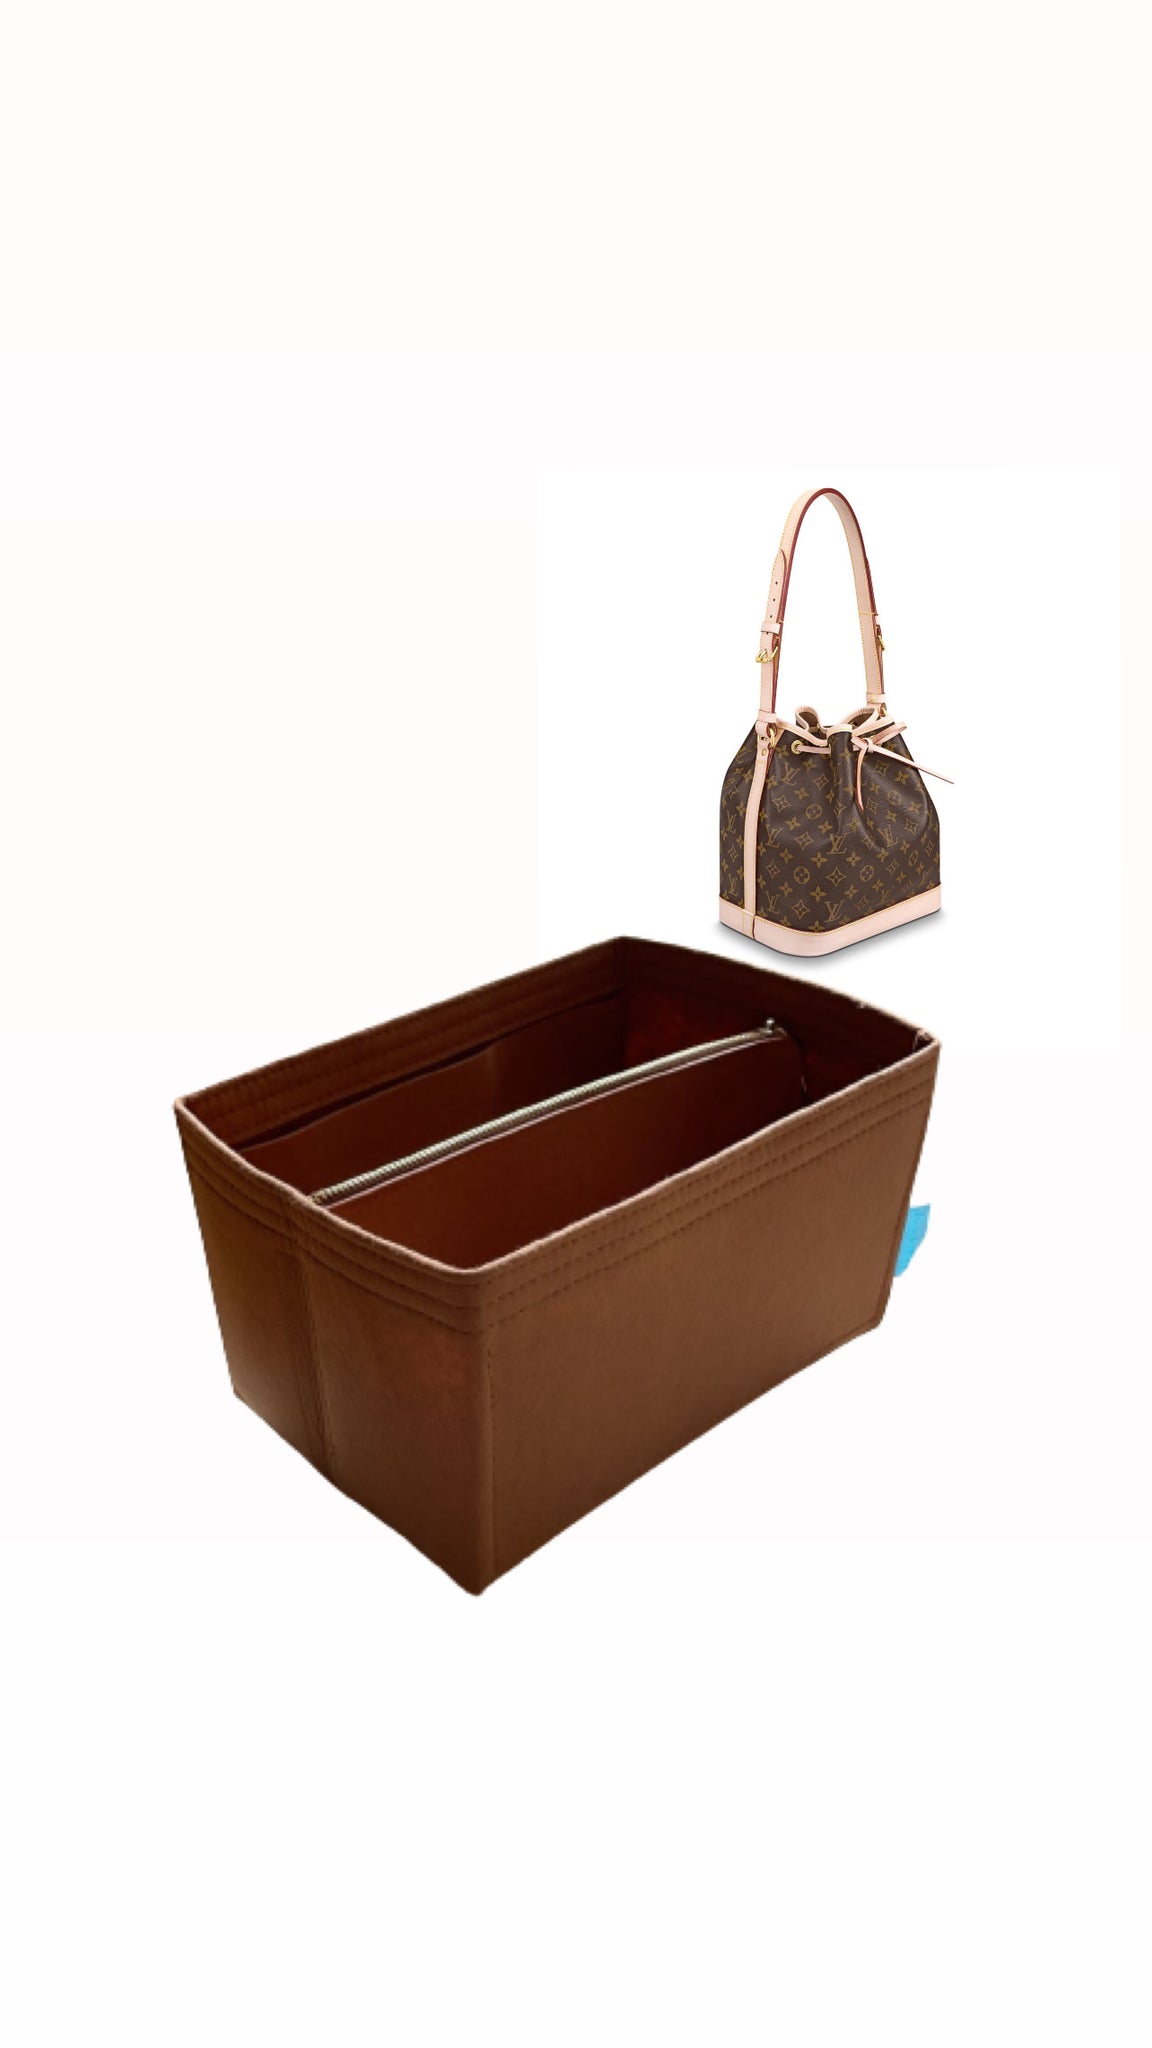 Bag and Purse Organizer with Regular Style for Louis Vuitton Noe